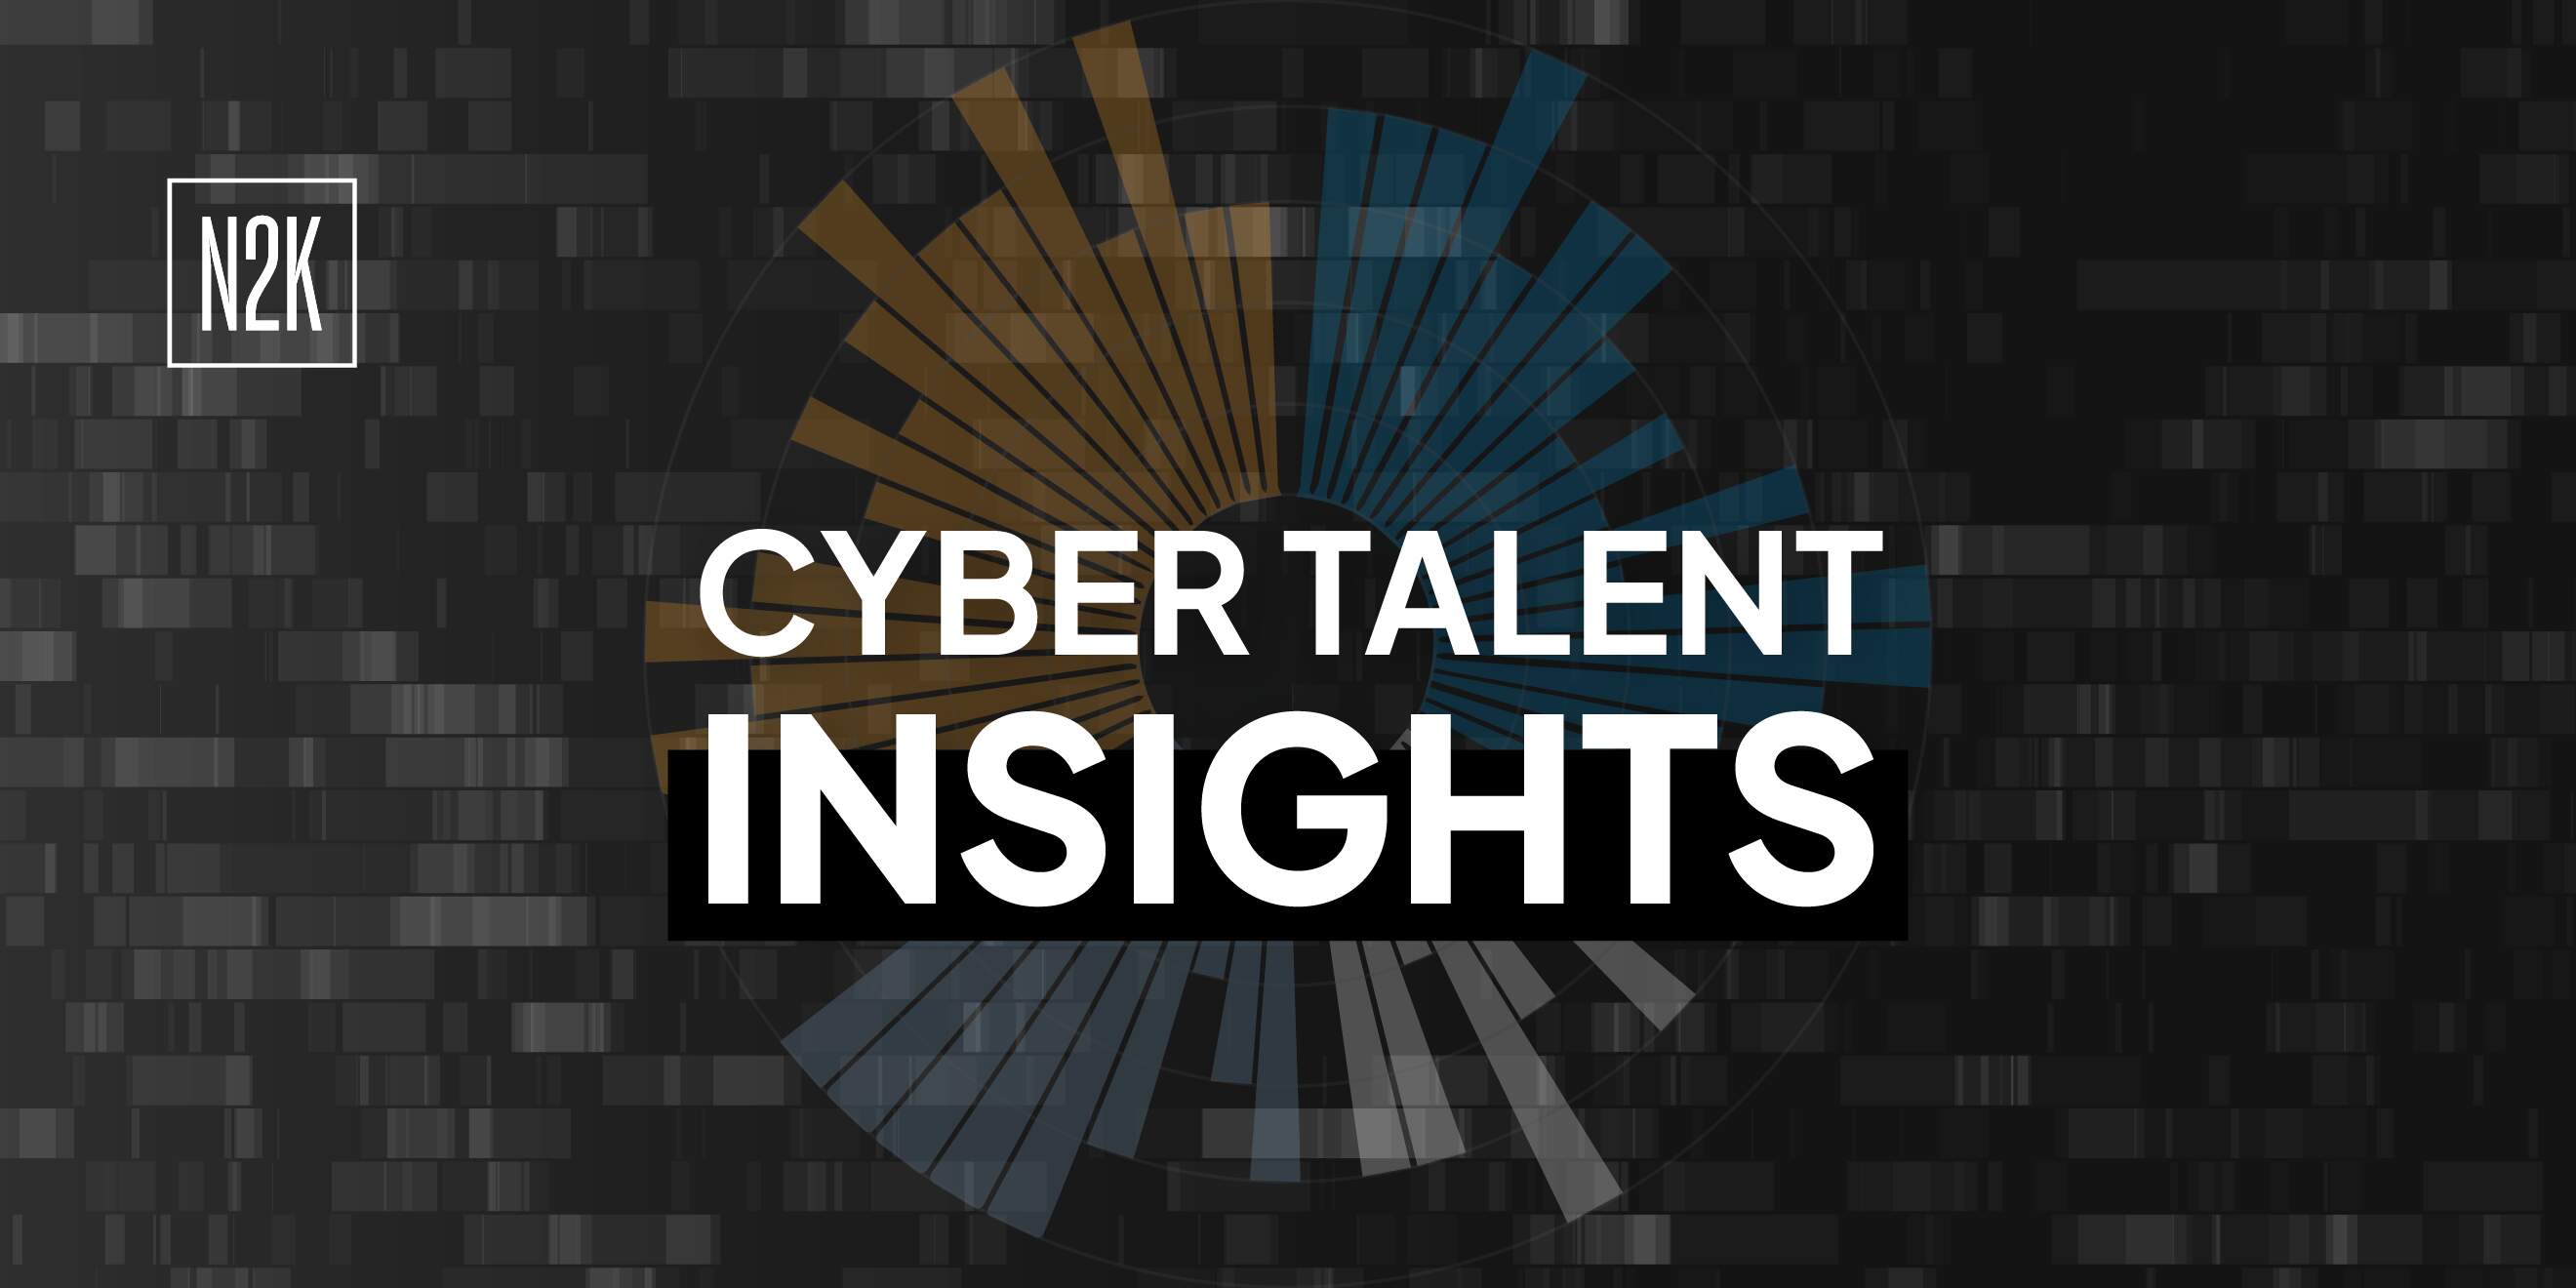 N2K CyberWire Network Launches Cyber Talent Insights Special Series Podcast